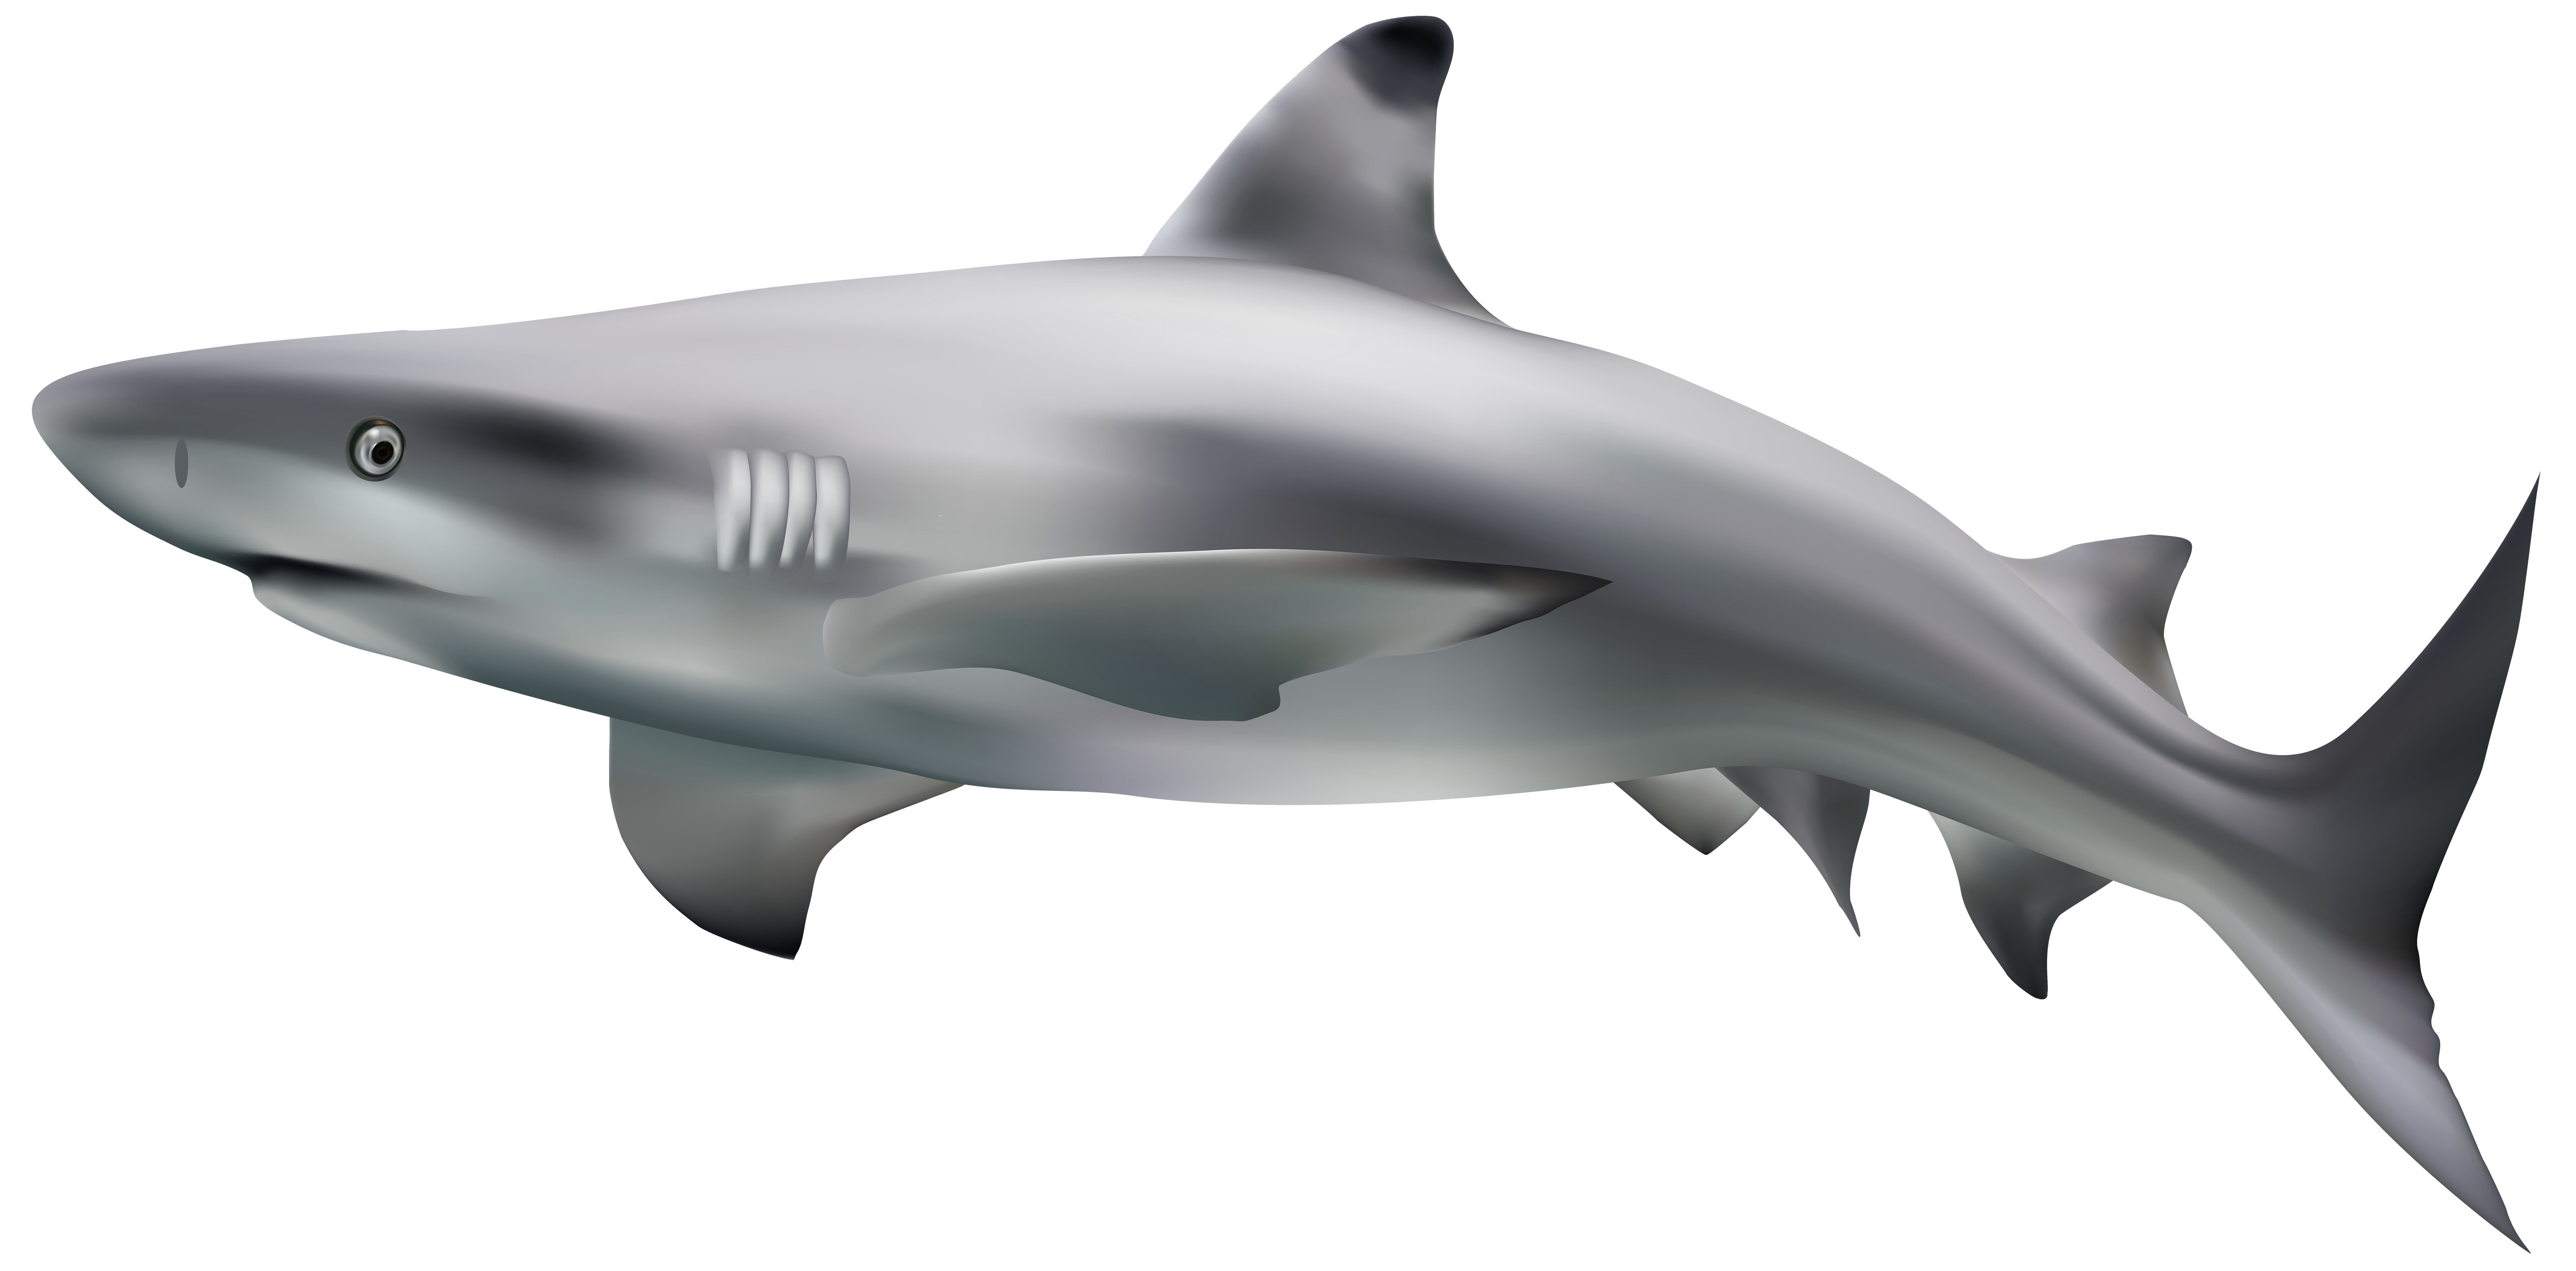 White Shark Png Pngkit Selects 929 Hd Sharks Png Images For Free